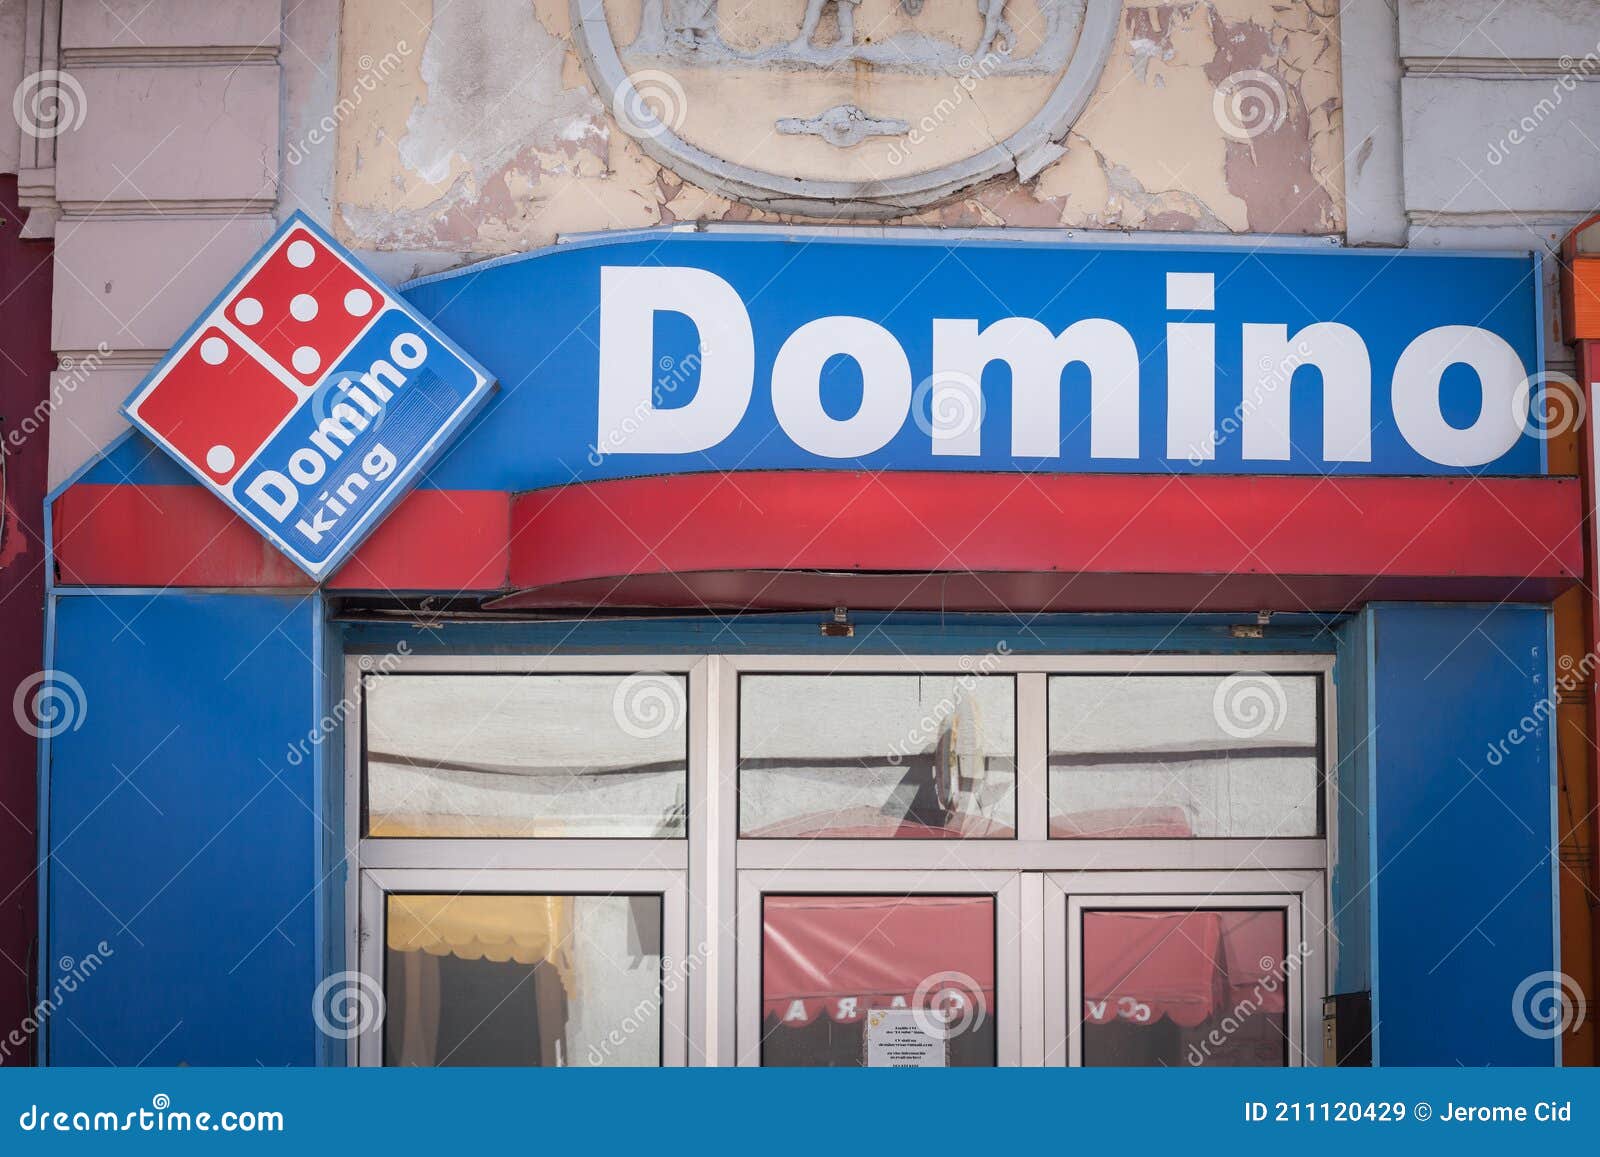 Humble dominos tx in Loading interface